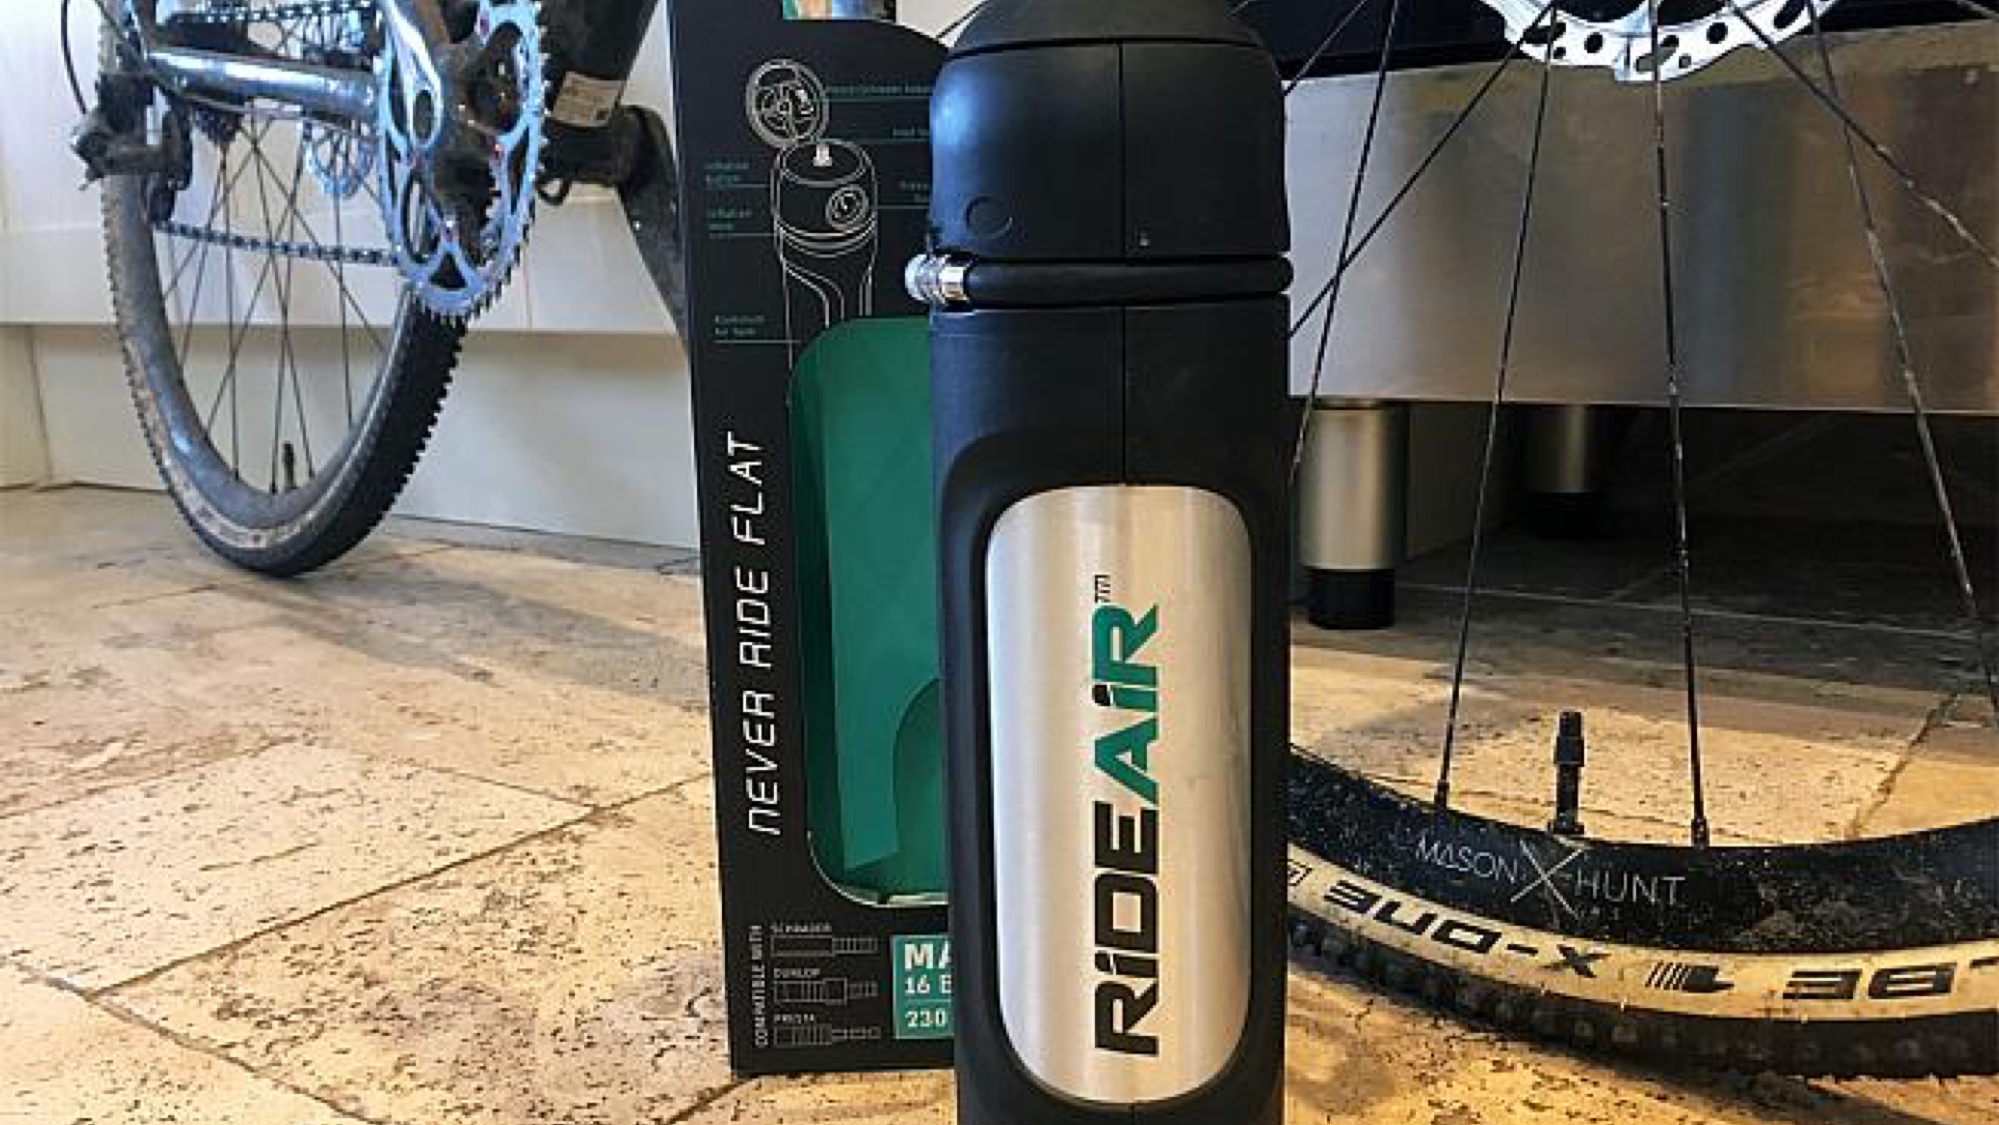 RIDEAIR REVIEW: TUBELESS SALVATION IN A CAN